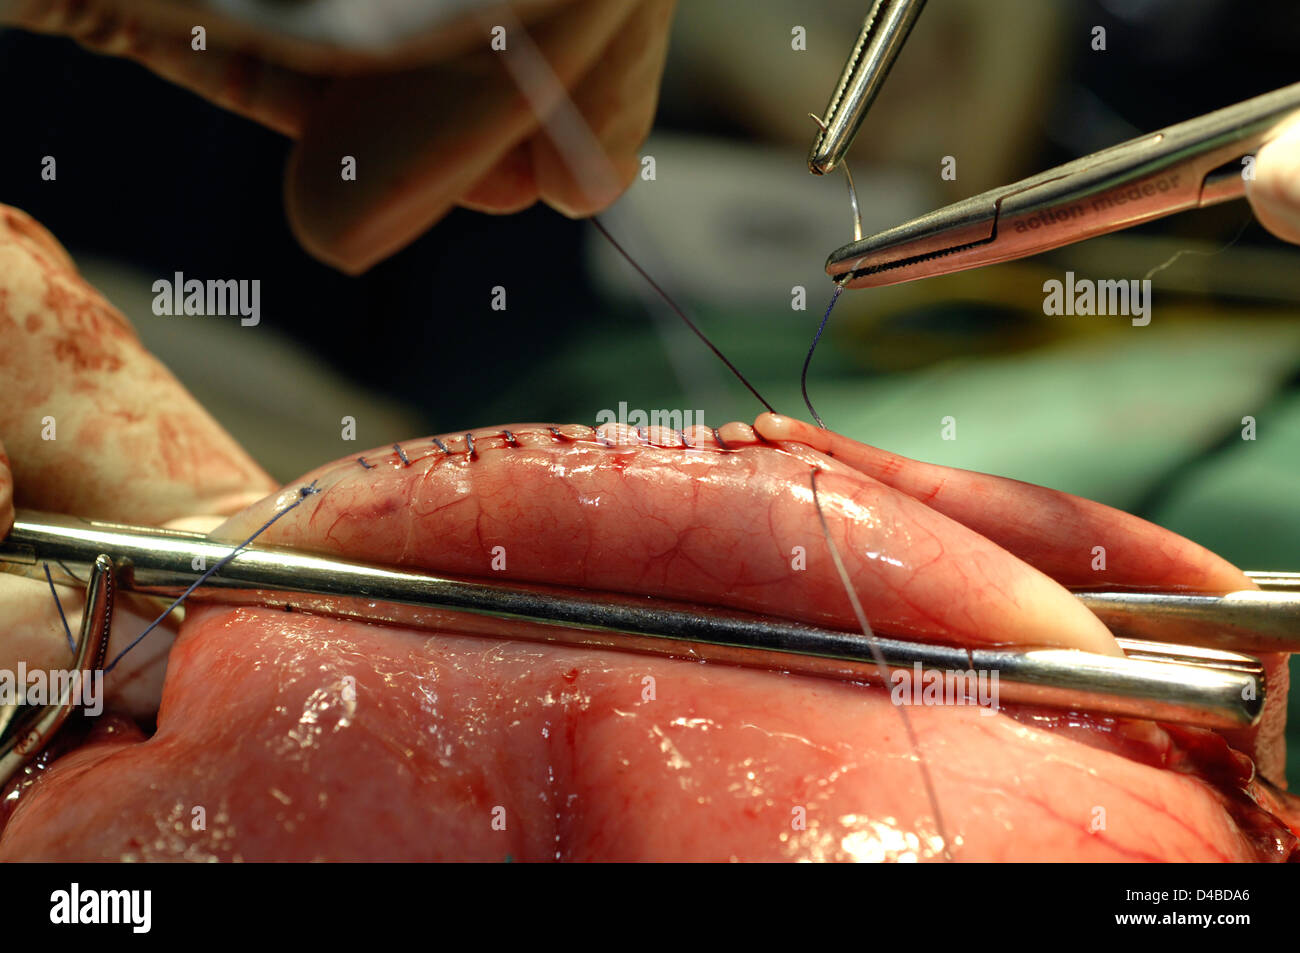 Non-absorbable sutures are used to secure two sections together before anastomosis Stock Photo